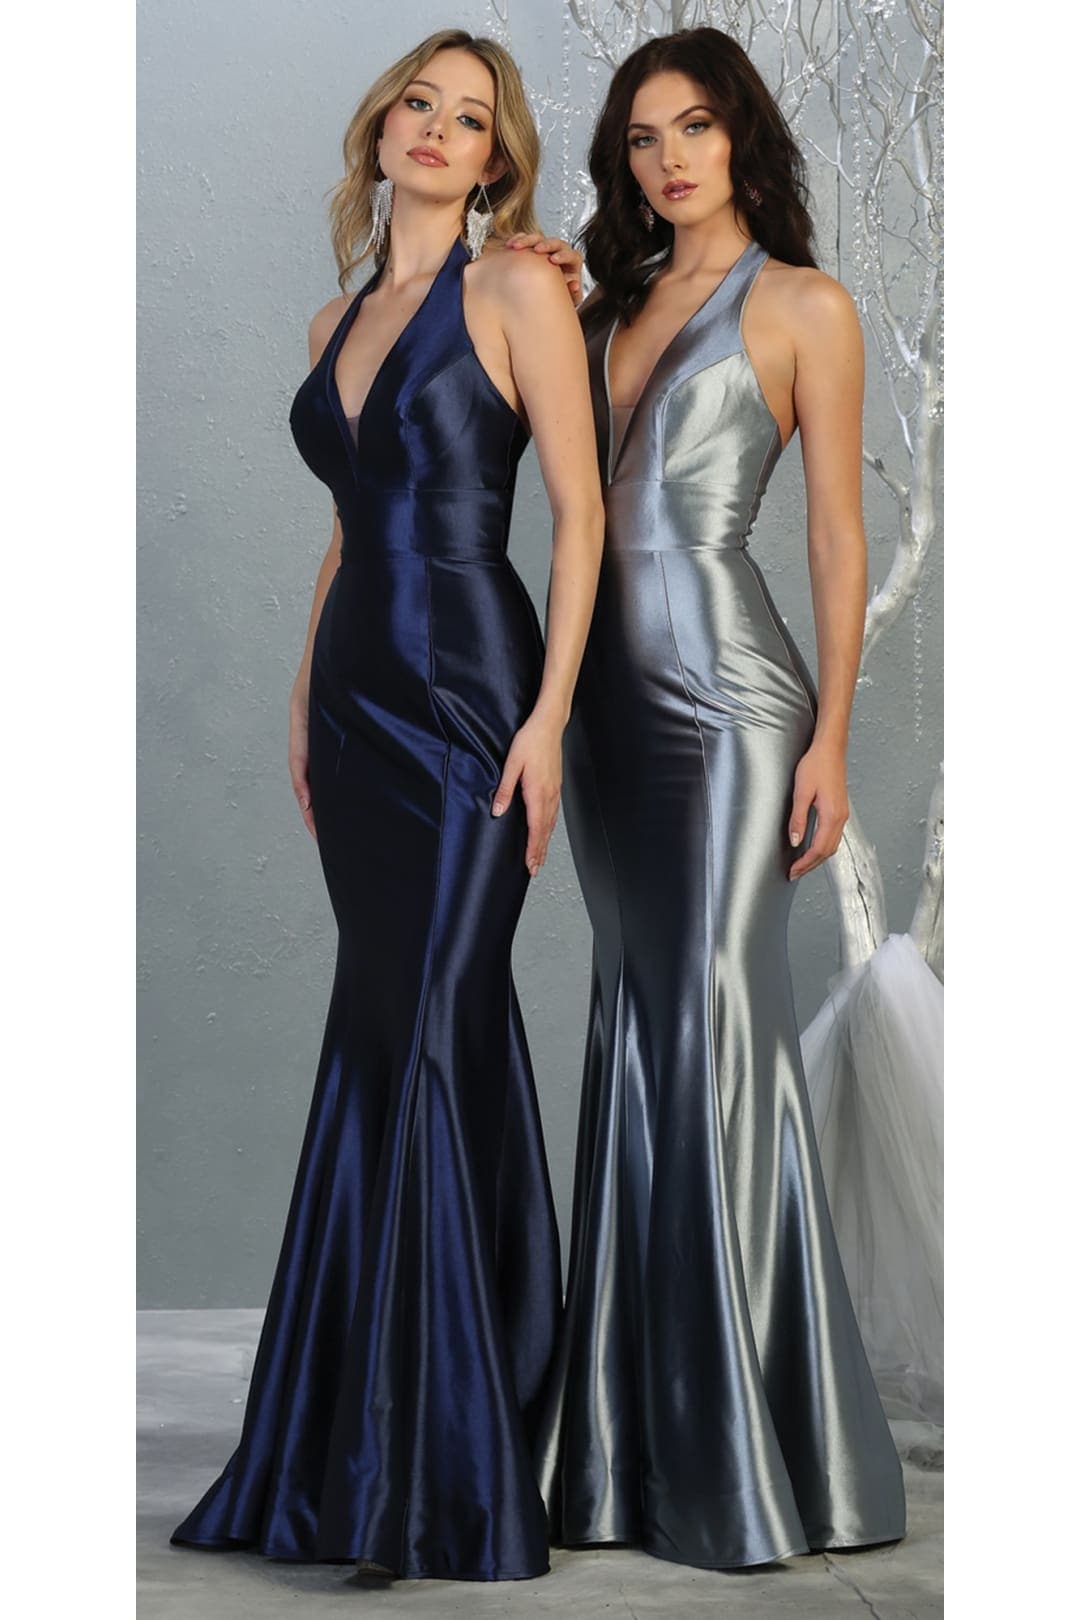 Silmple Prom Long Formal Gown